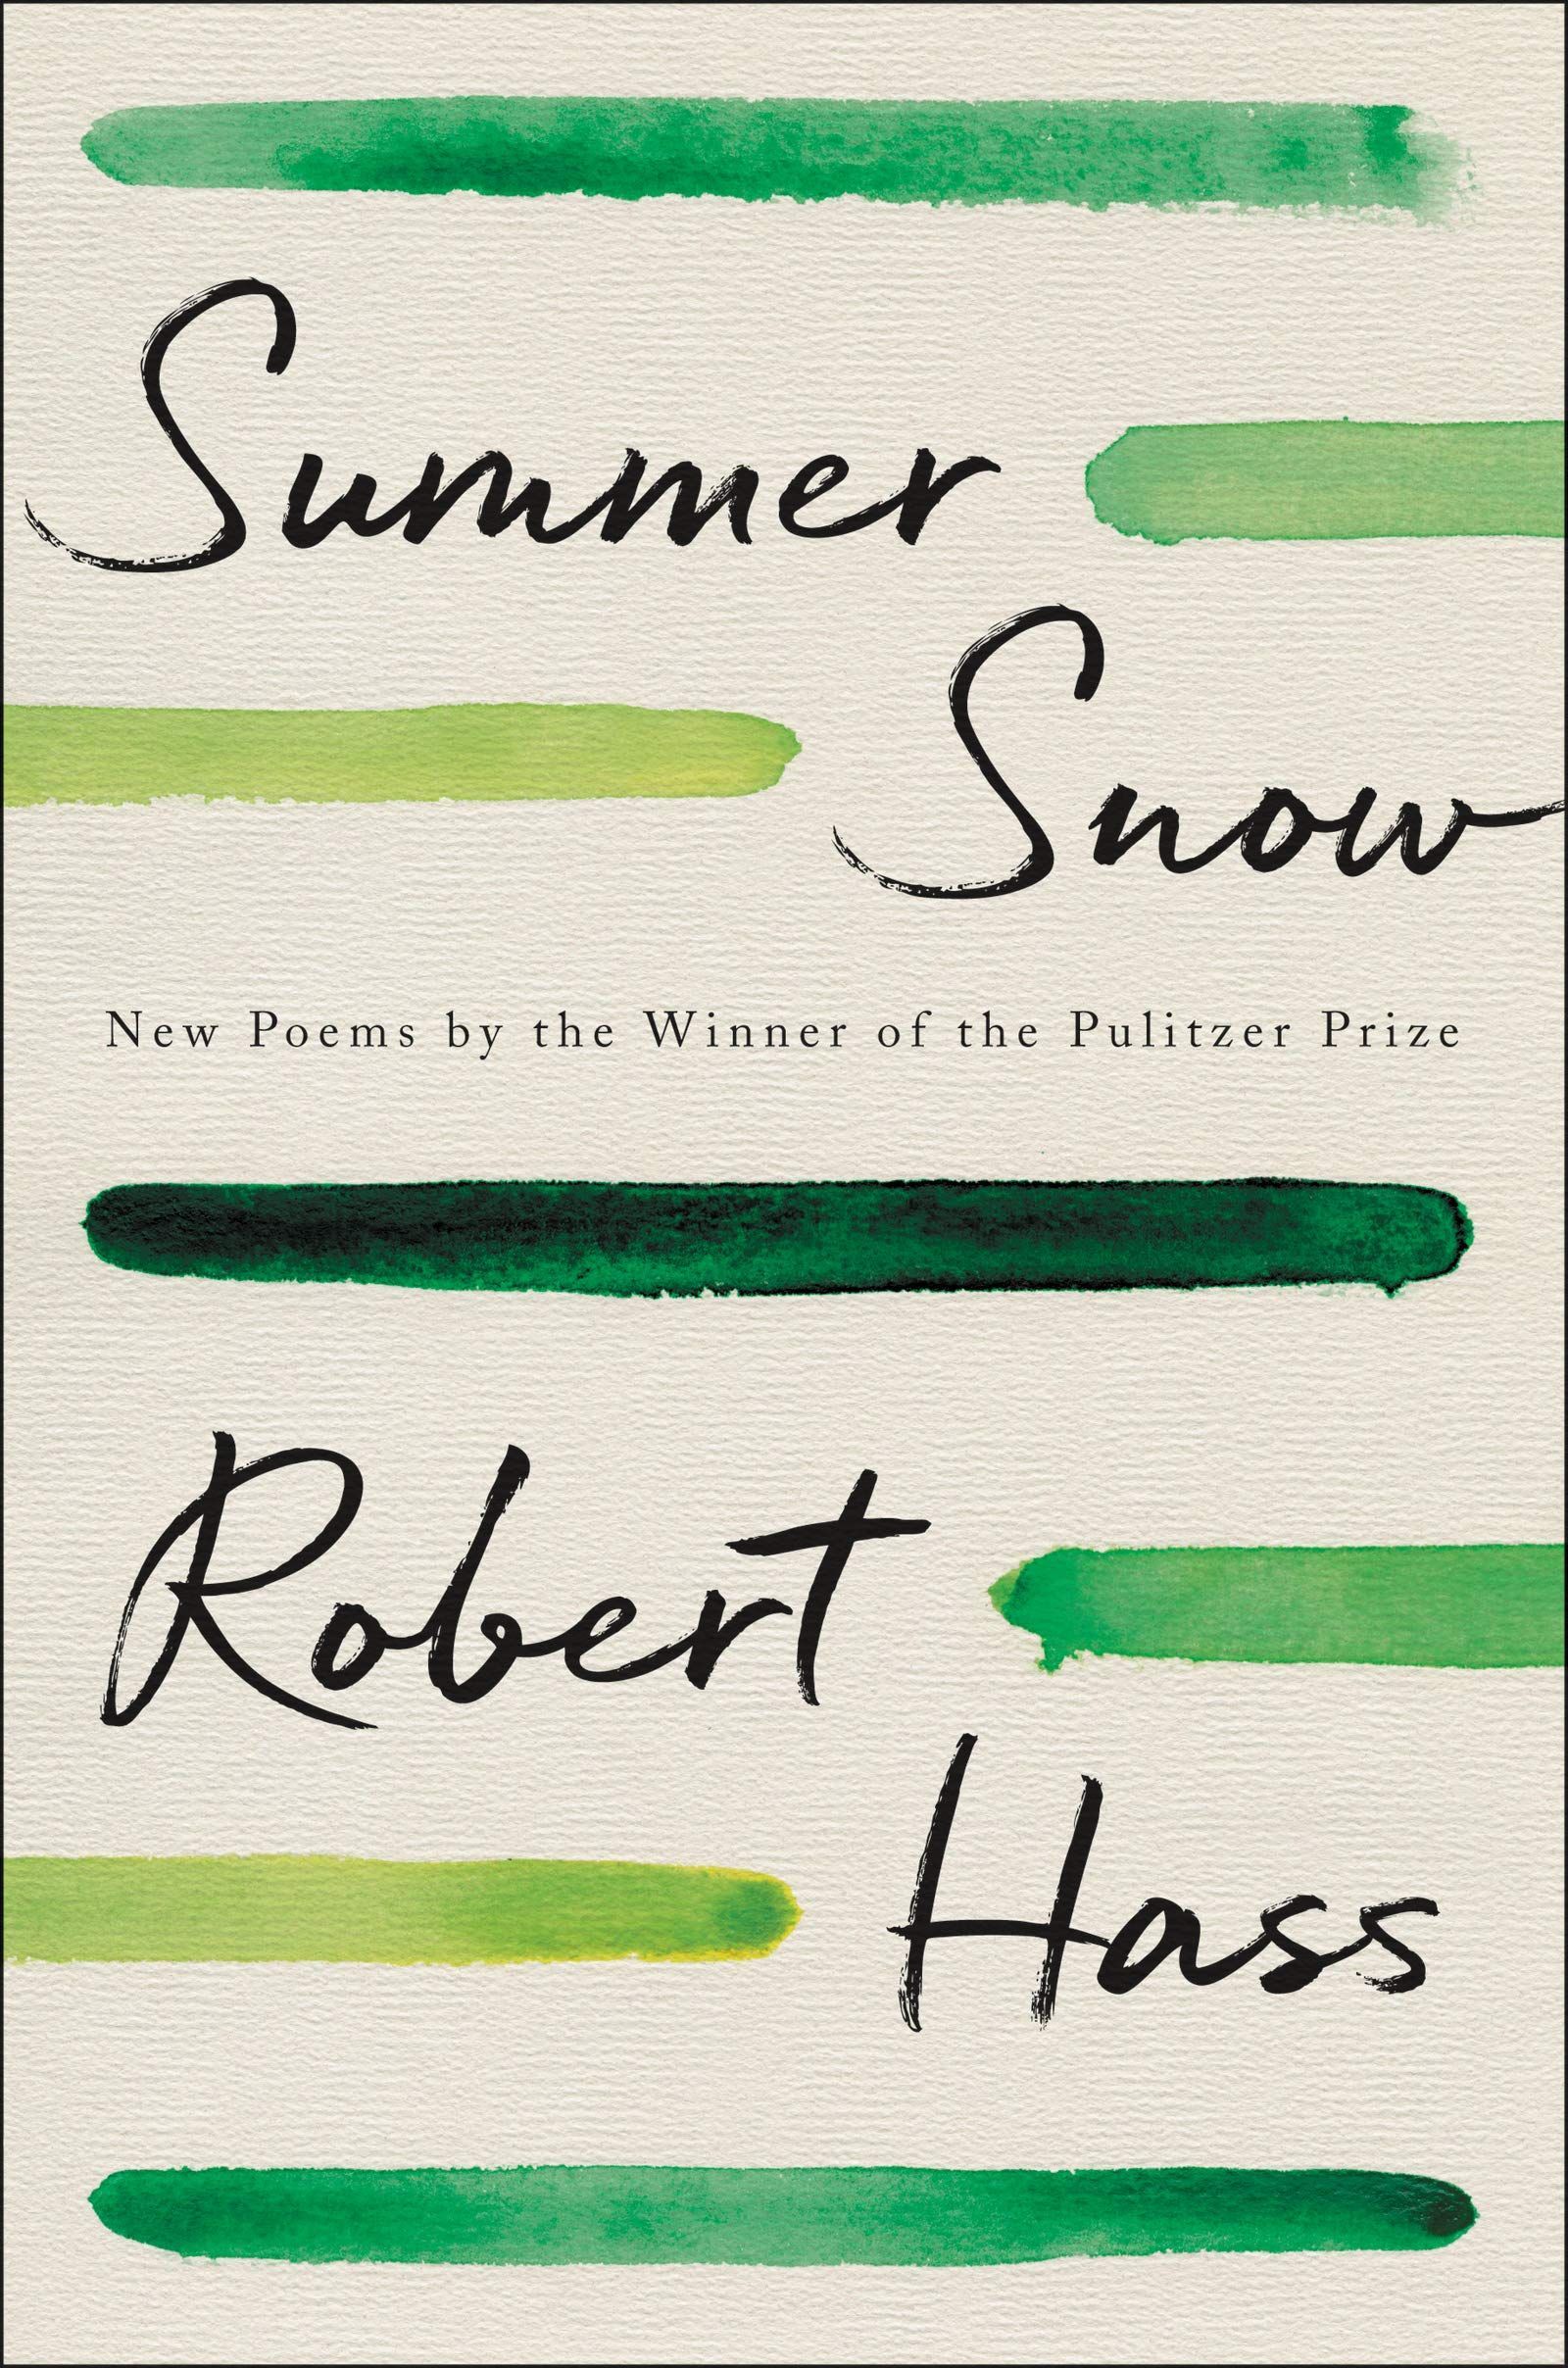 Song and the Names of Things: On Robert Hass’s “Summer Snow”